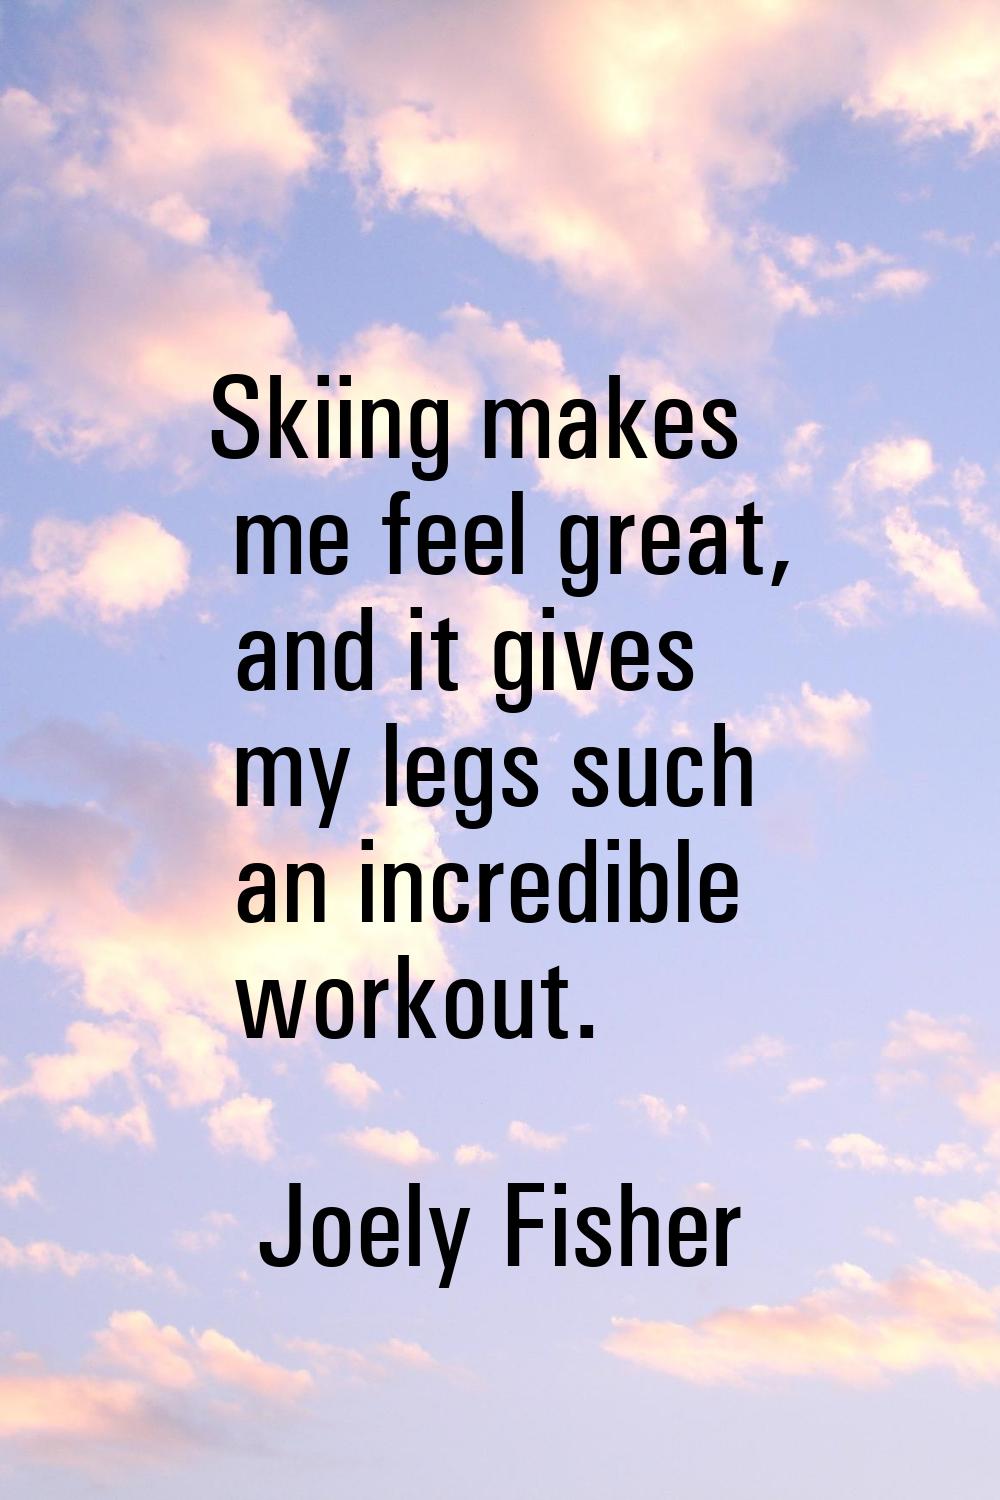 Skiing makes me feel great, and it gives my legs such an incredible workout.